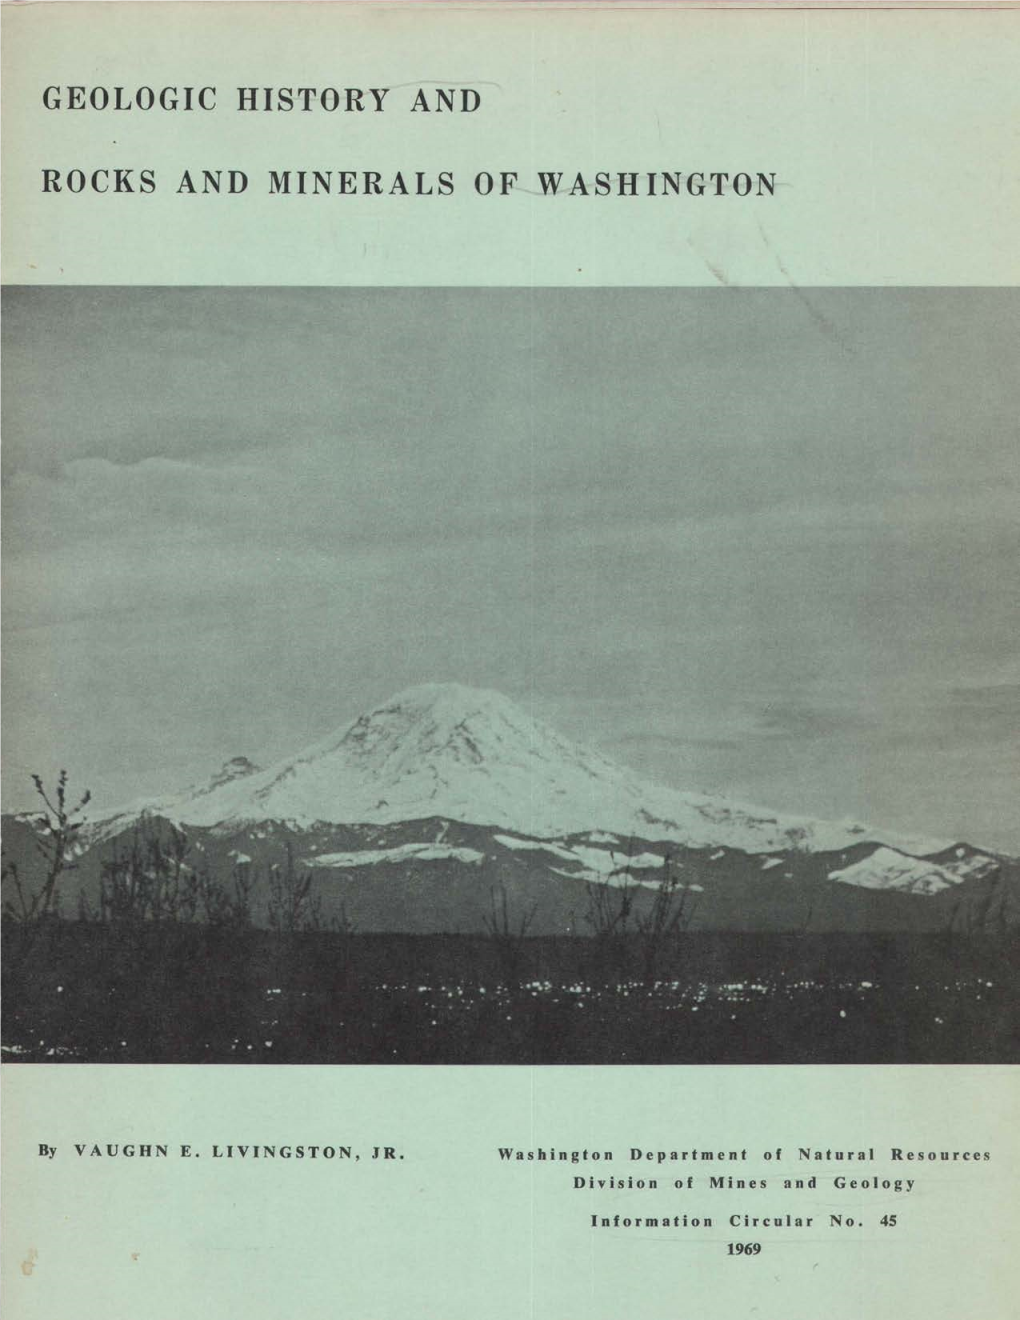 Geologic History and Rocks and Minerals of Washington